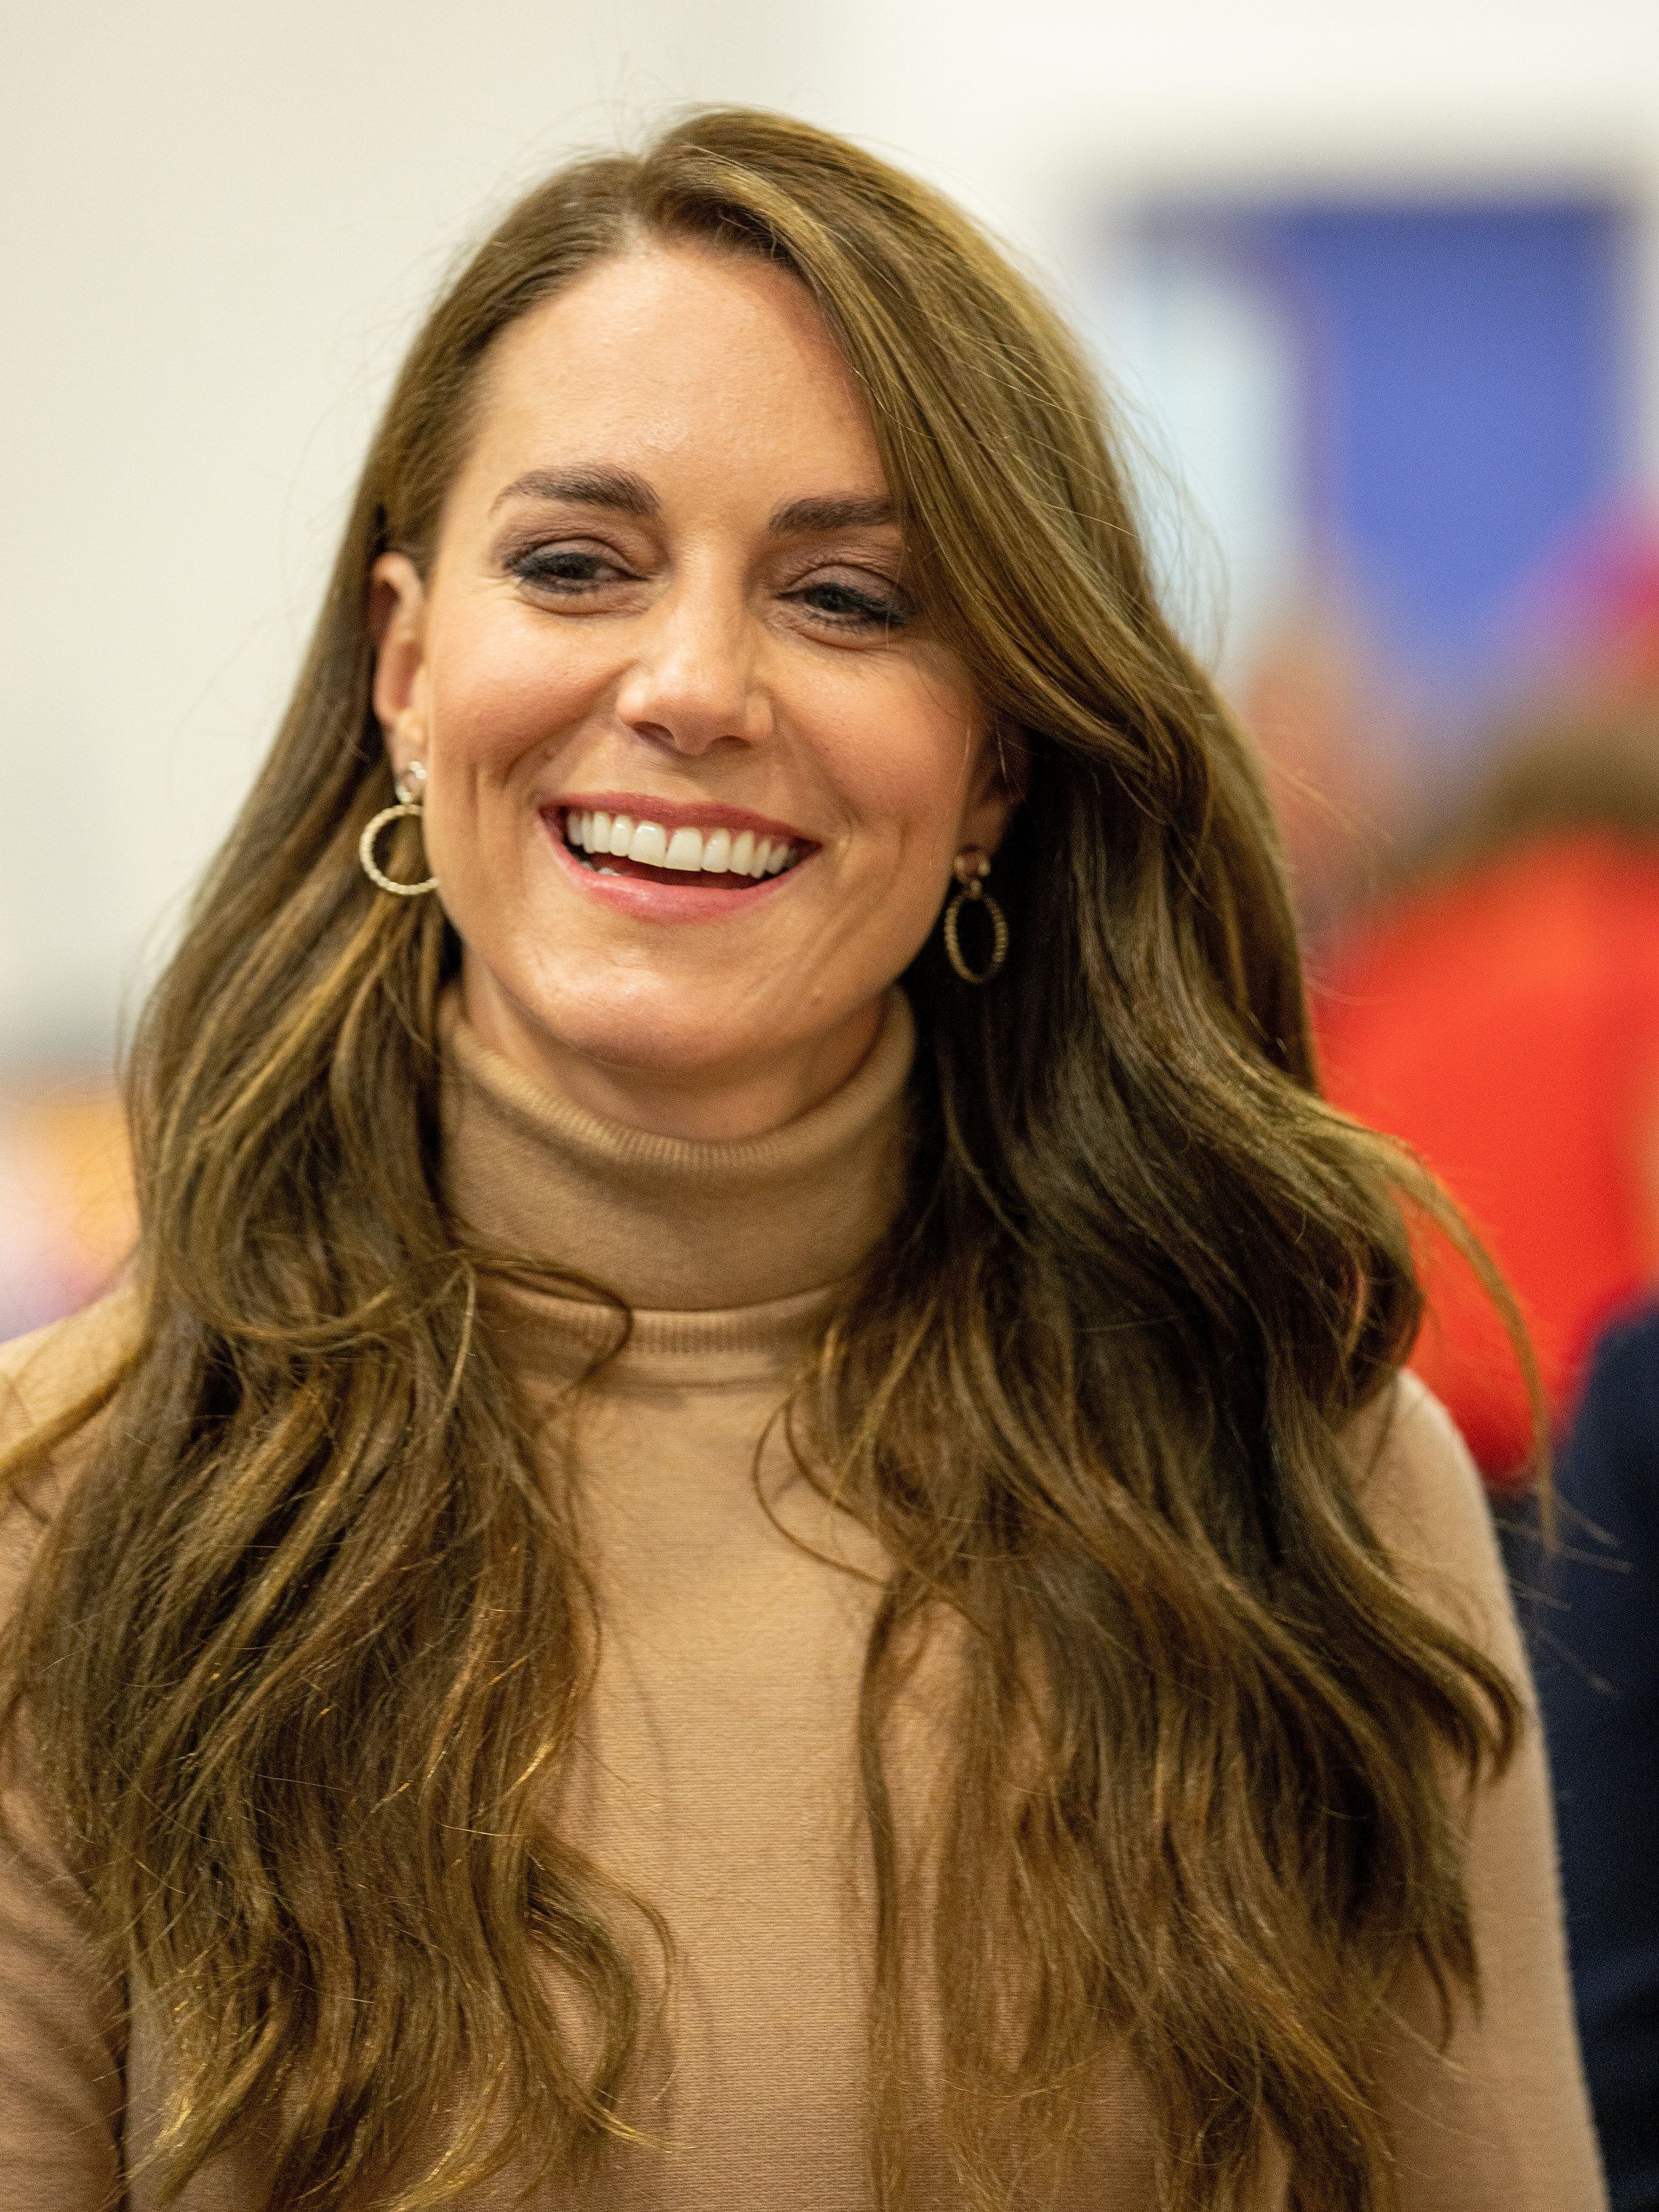 Image of Kate Middleton with shaggy feathered lob